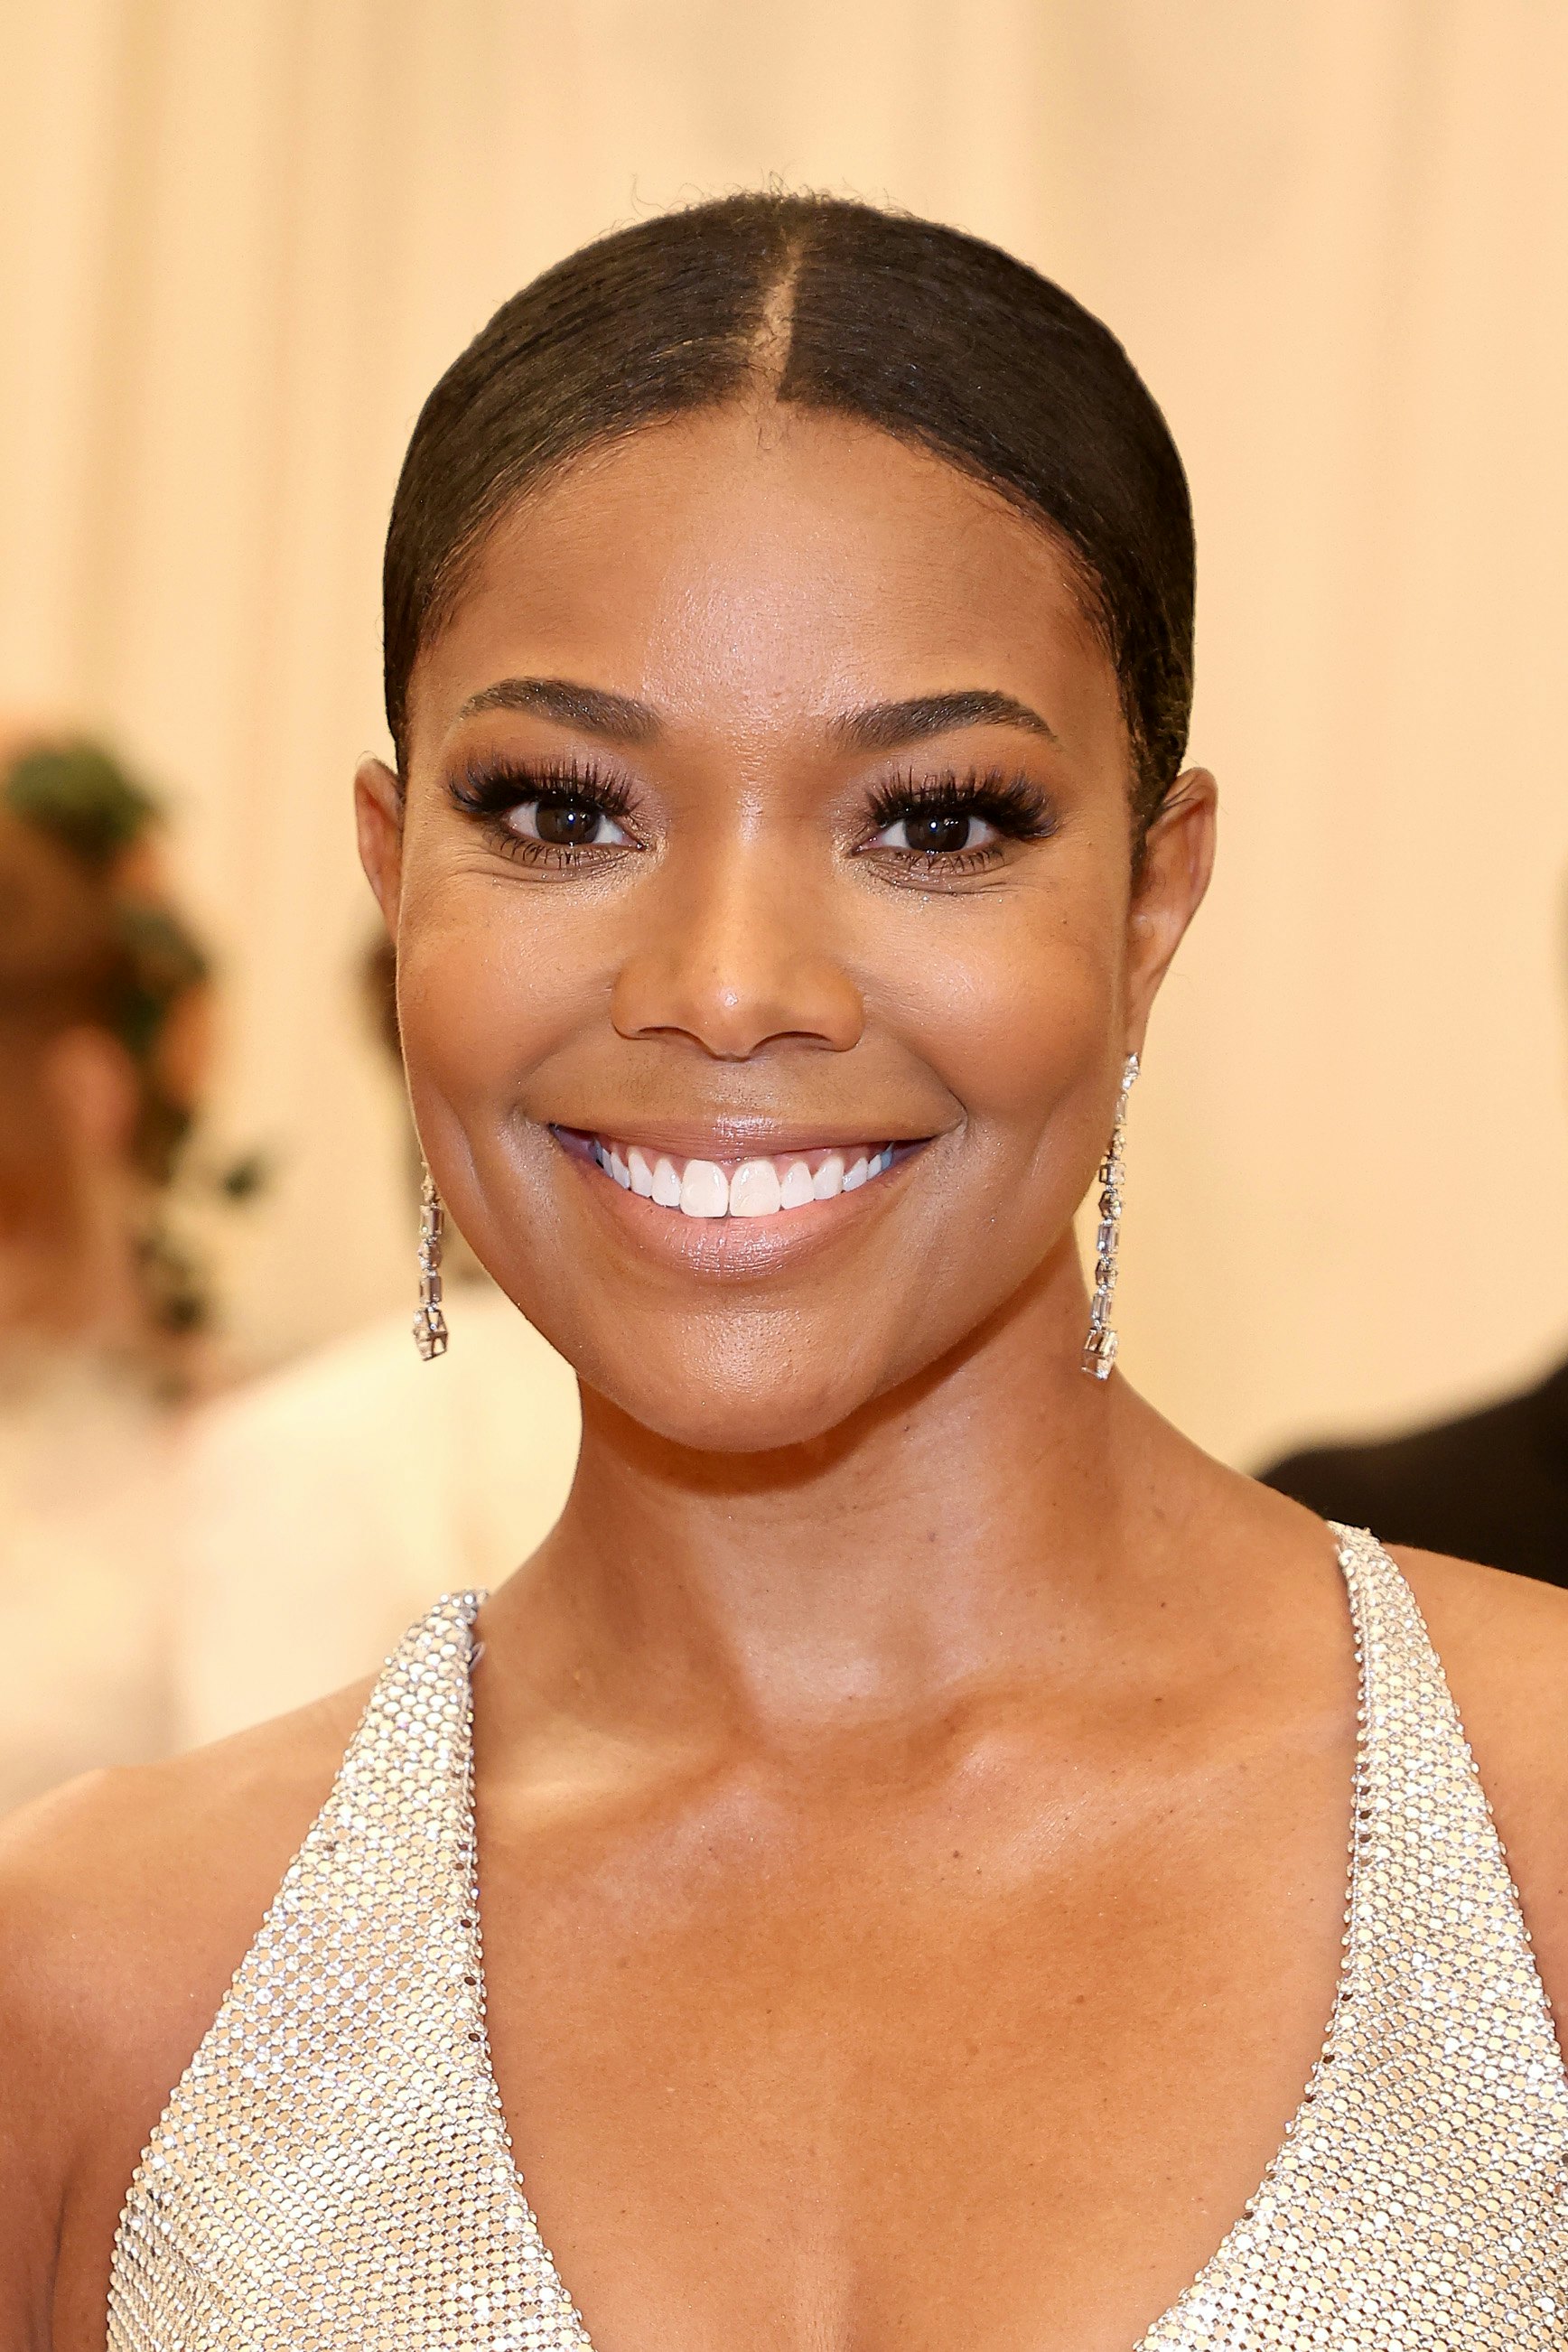 Gabrielle Union's Daughter Kaavia James Tries To Relax In Hilarious Video